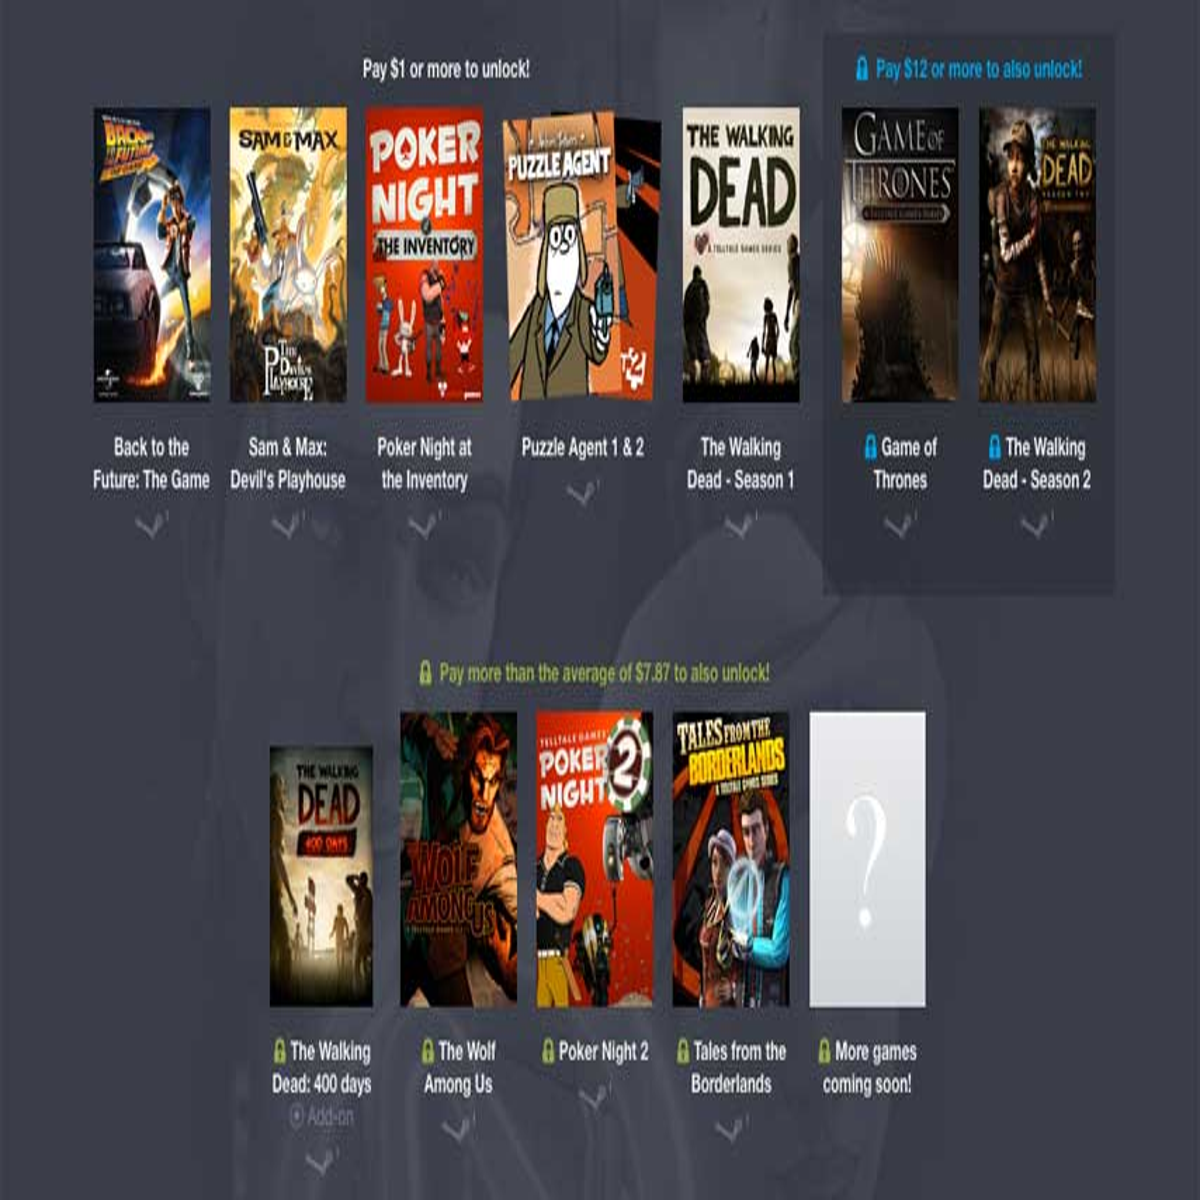 Game Dev - Humble Bundle is hit with layoffs